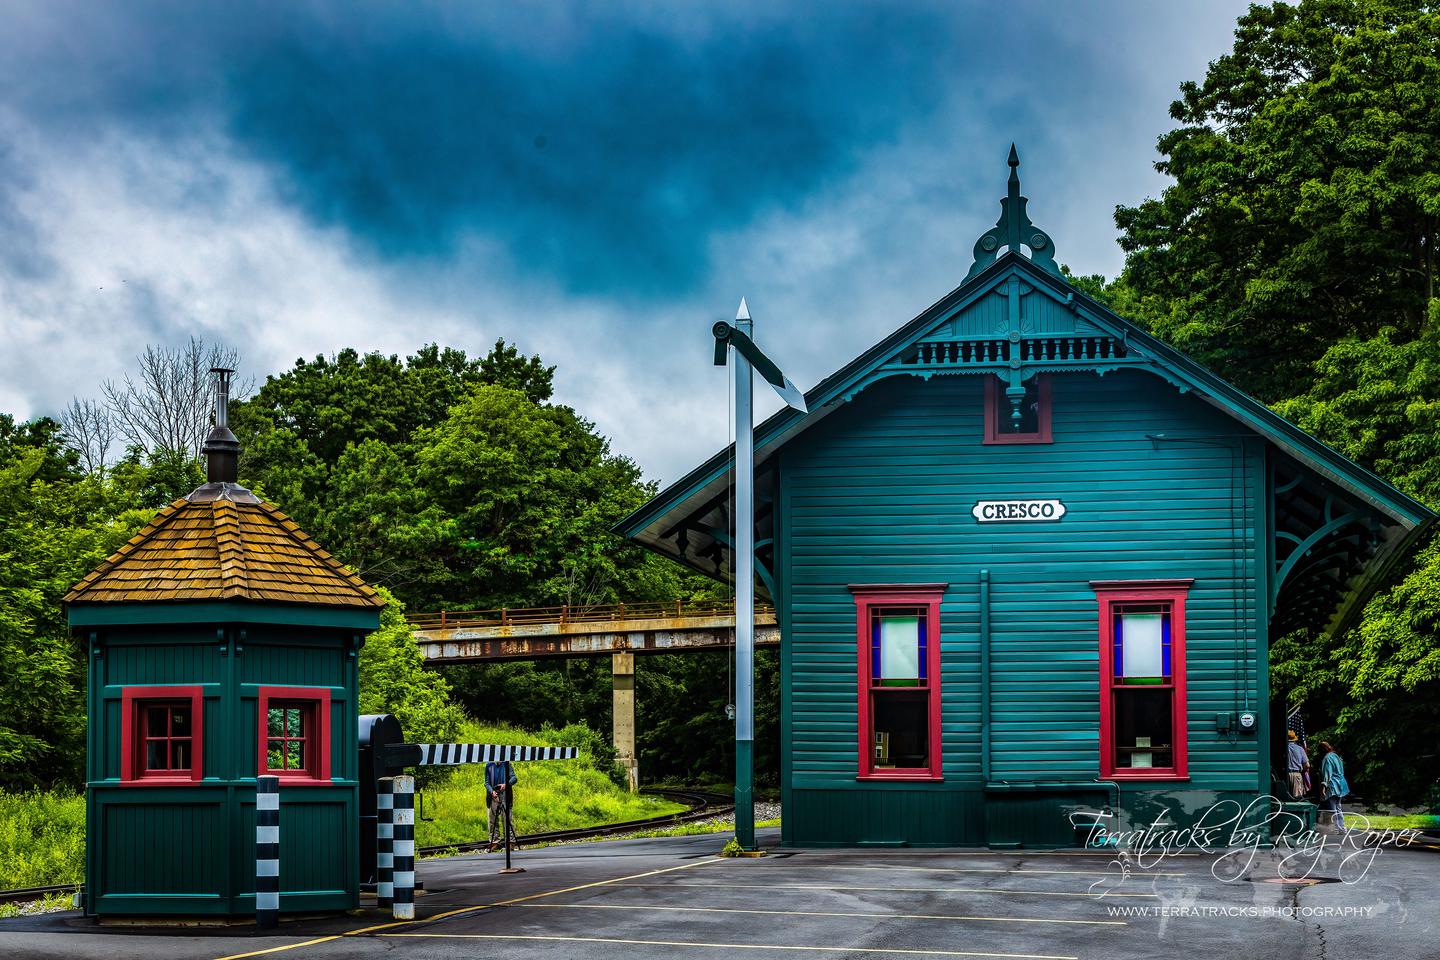 Dramatic color photo of Cresco station and buildings.The Barrett Township Historical Society maintains the Cresco Station Museum and the Library Research Center buildings providing many displays and exhibits that not only help preserve these items of the history of the area, but also tell the stories of the communities past.